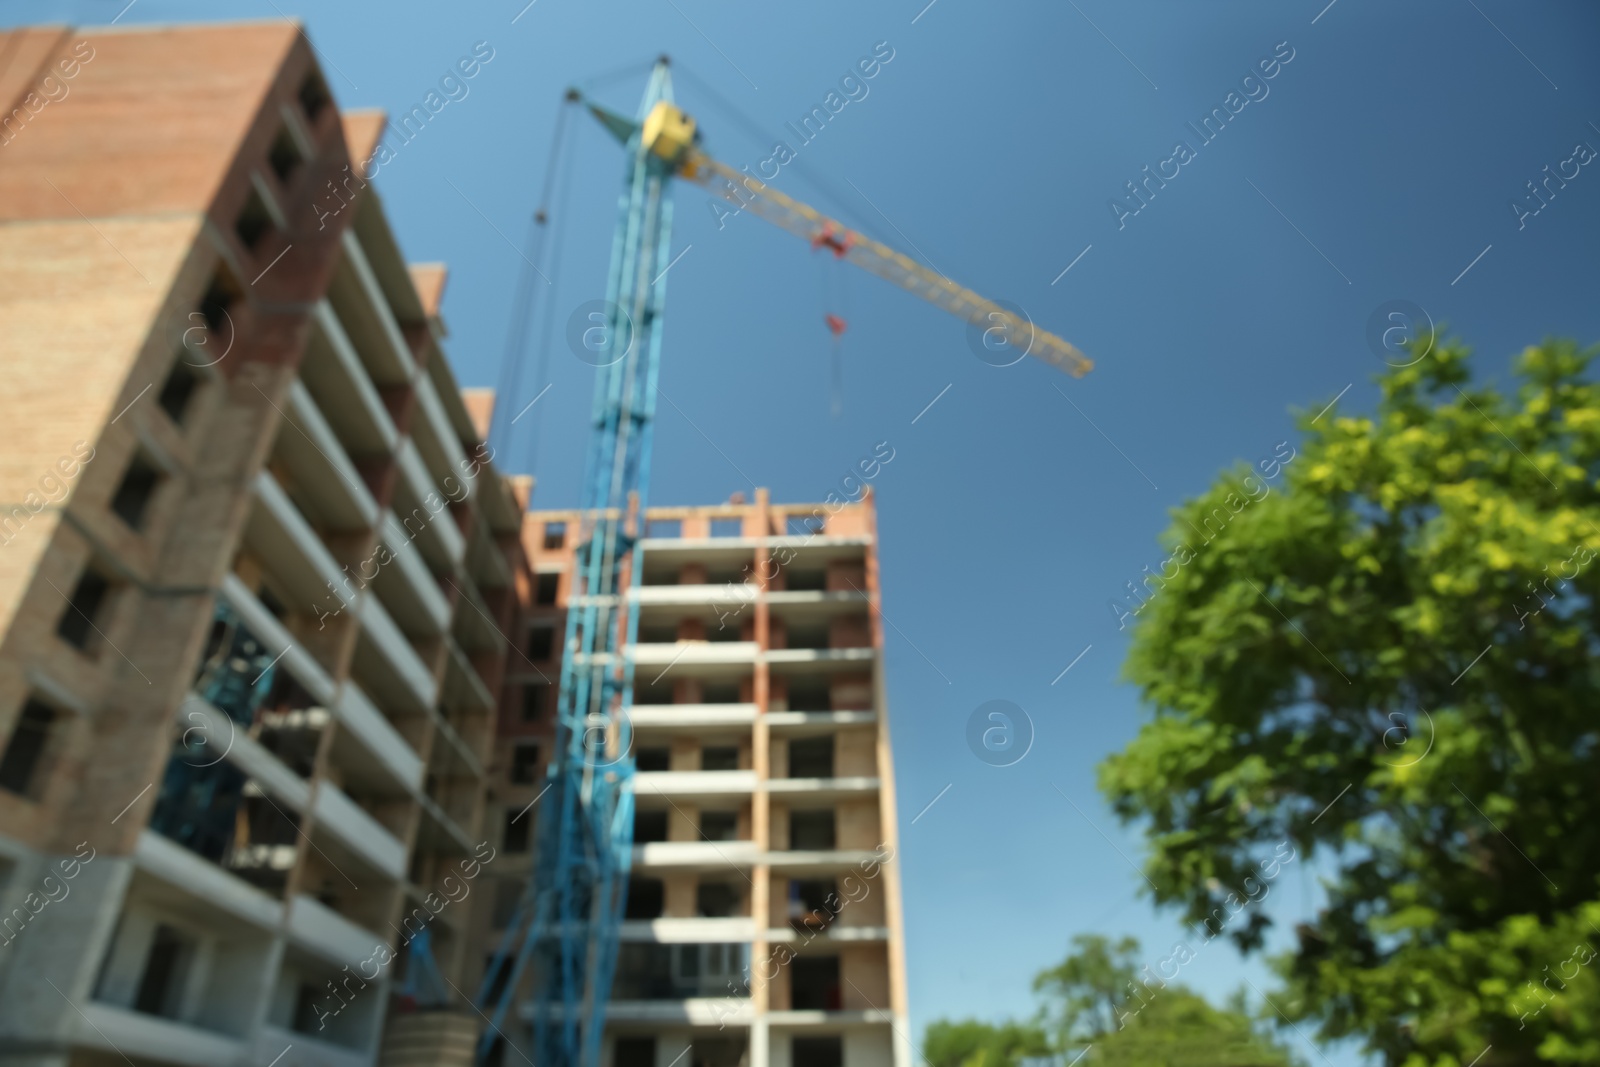 Photo of View of unfinished building and tower crane against blue sky